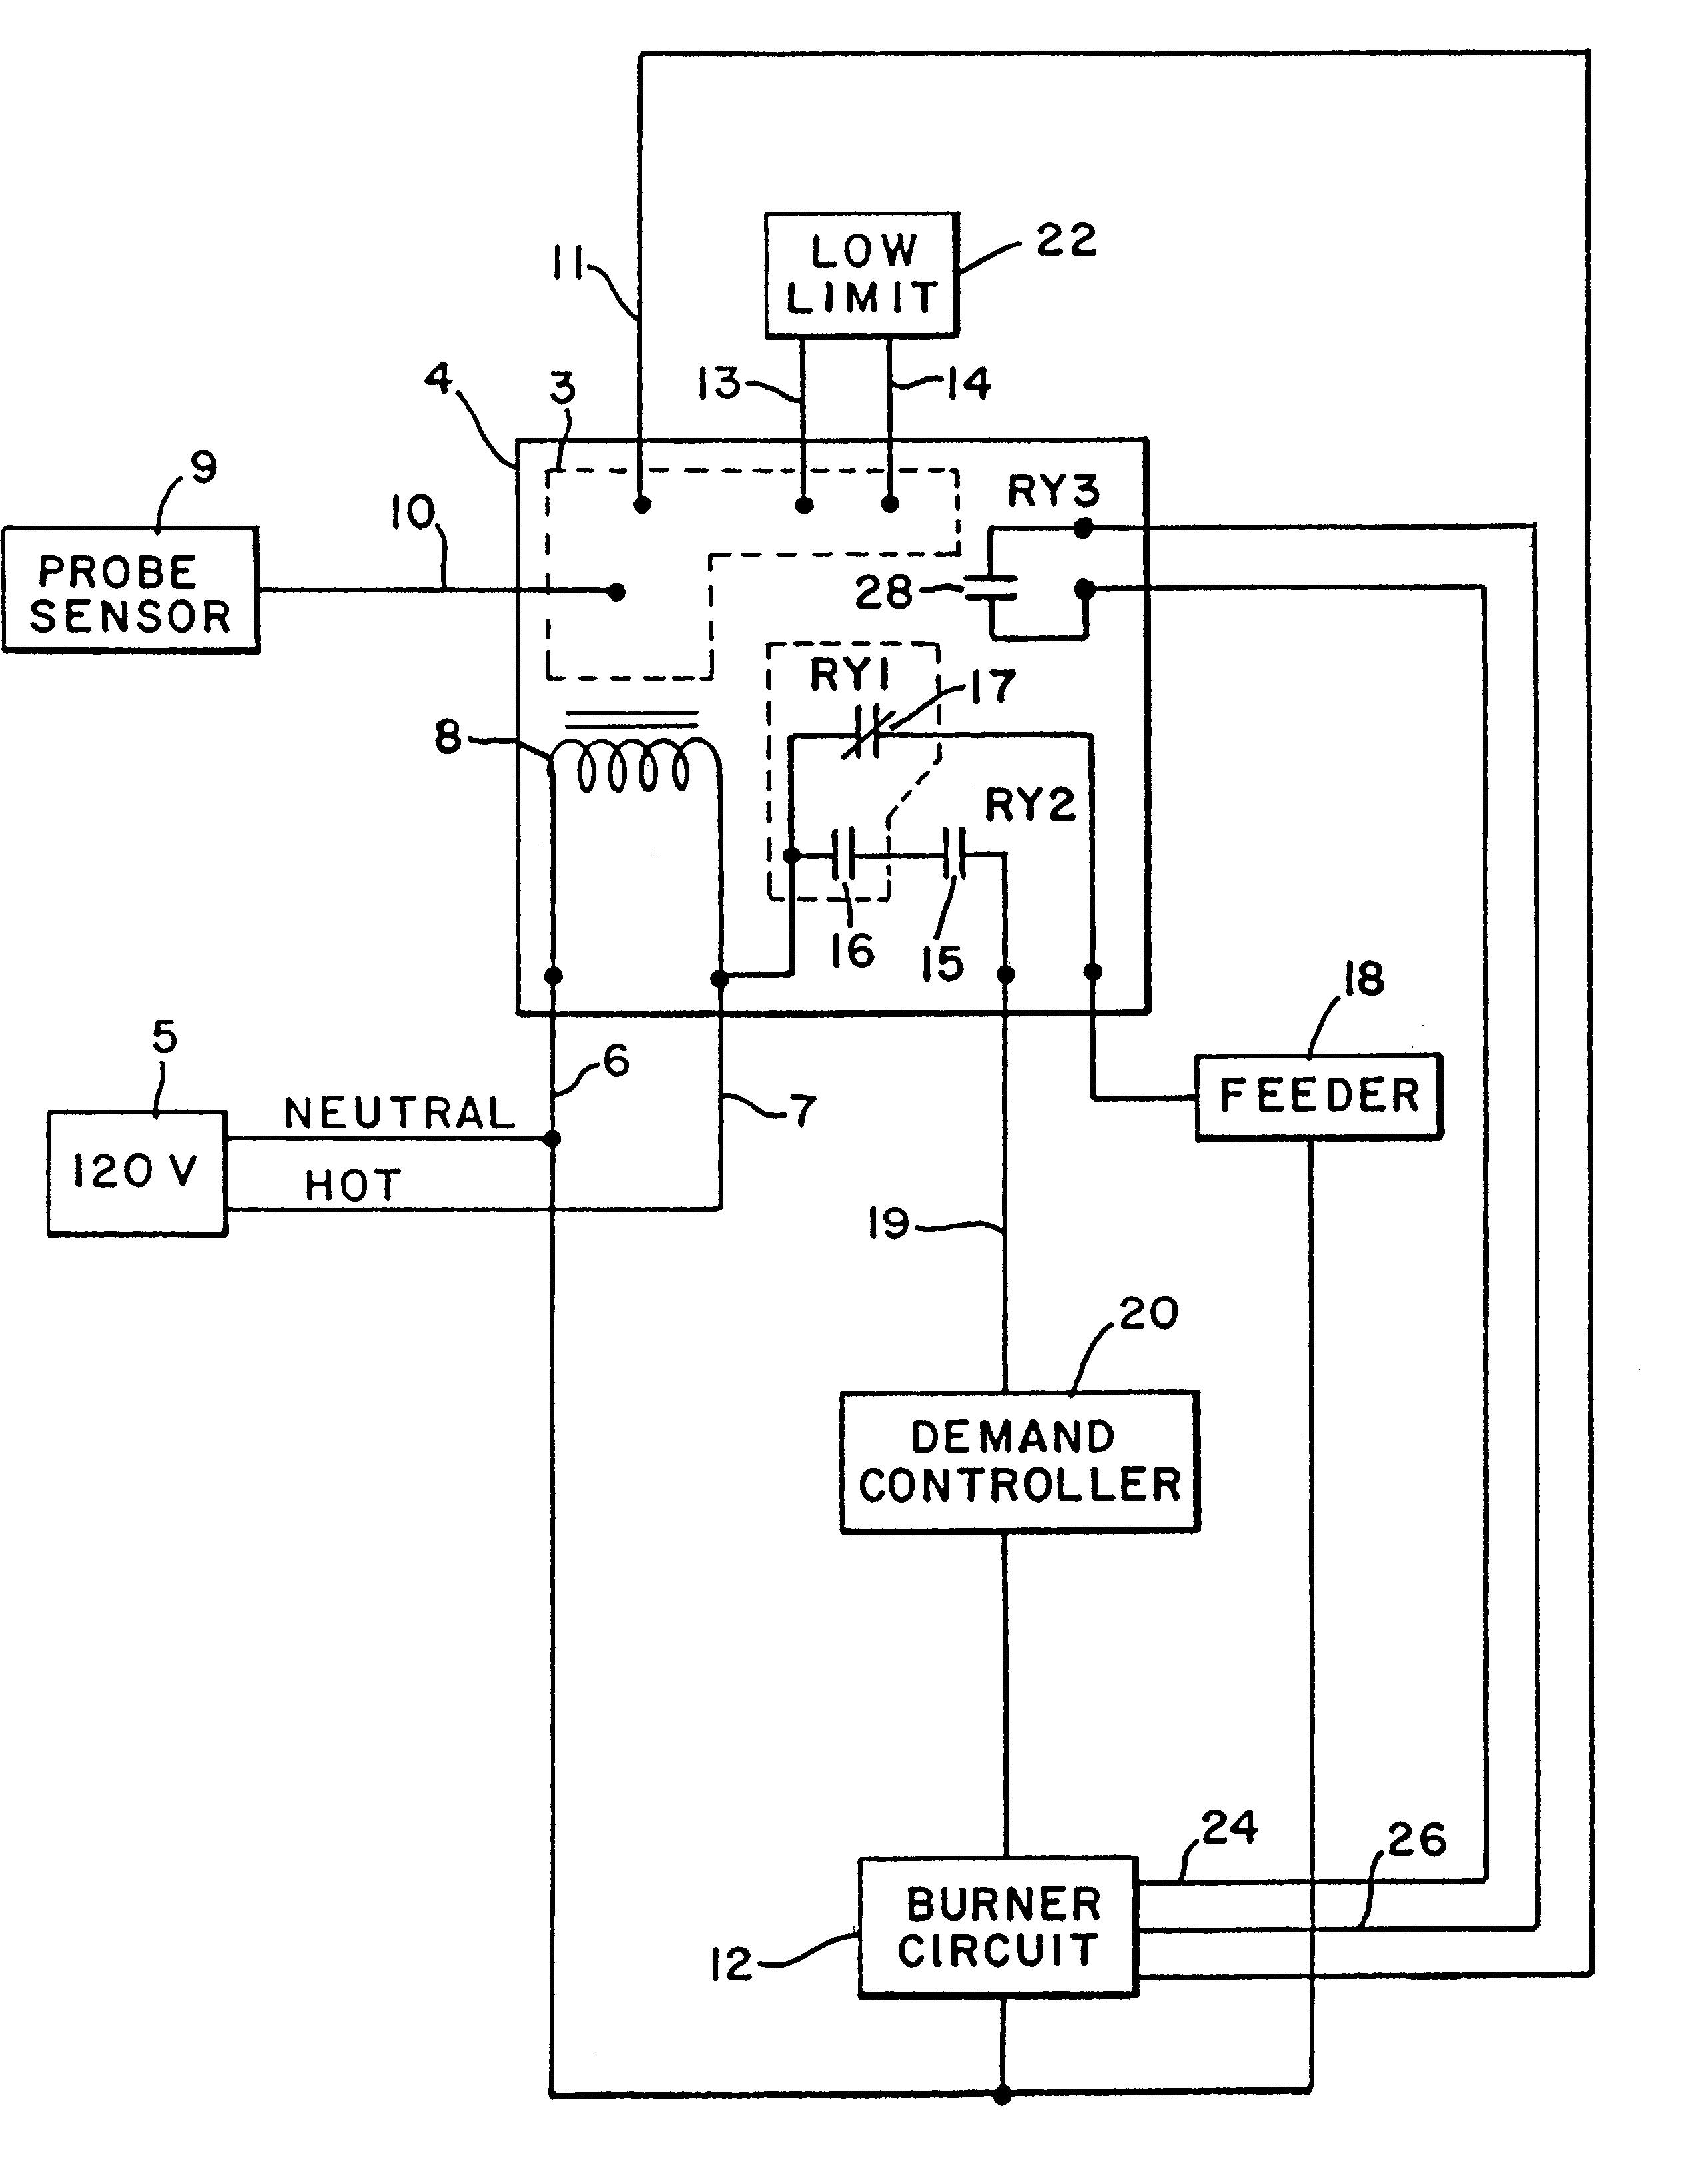 Cycle control system for boiler and associated burner